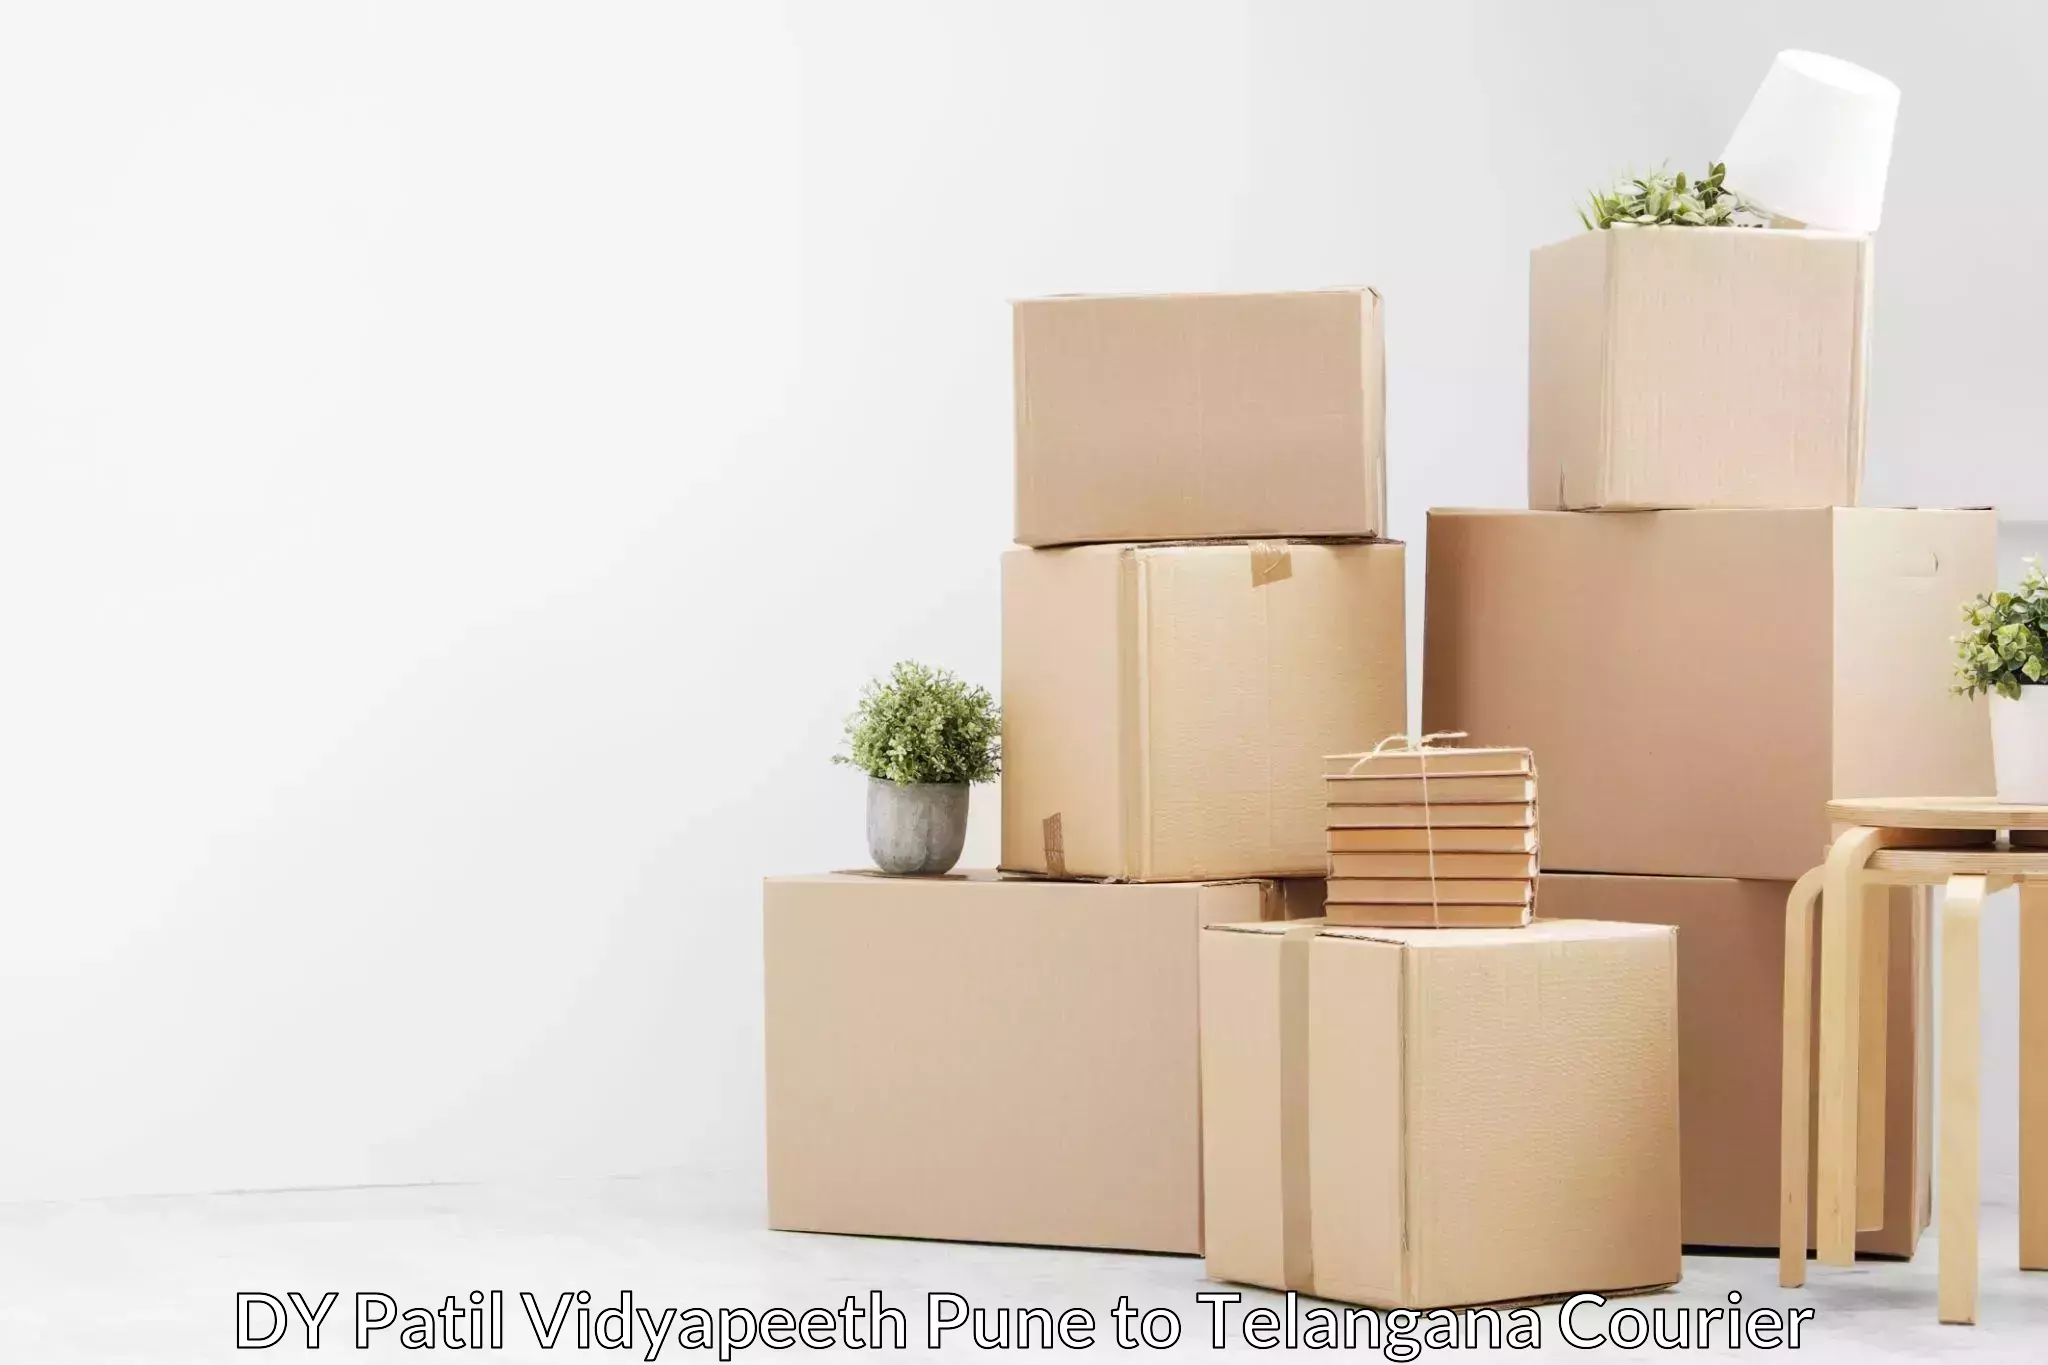 Full home relocation services in DY Patil Vidyapeeth Pune to Zaheerabad